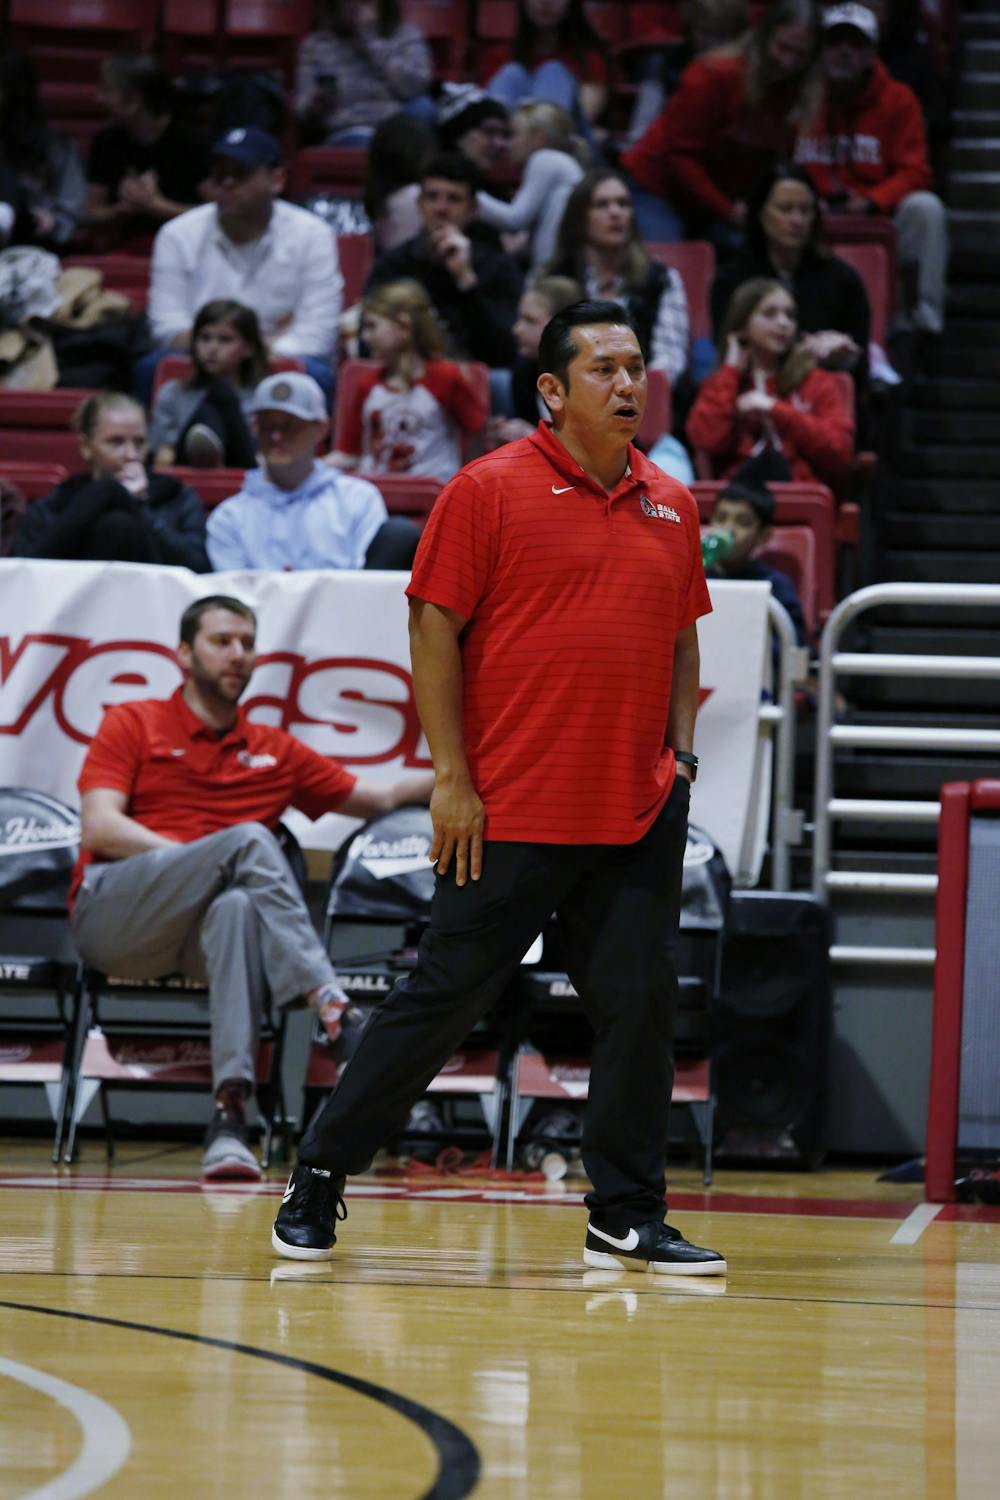 Ball State men's volleyball Head Coach Donan Cruz speaks to the team from the bench area against Sacred Heart University on Jan. 28, 2023 at Worthen Arena. The Cardinals won against the Pioneers 3-0. Mya Cataline, DN